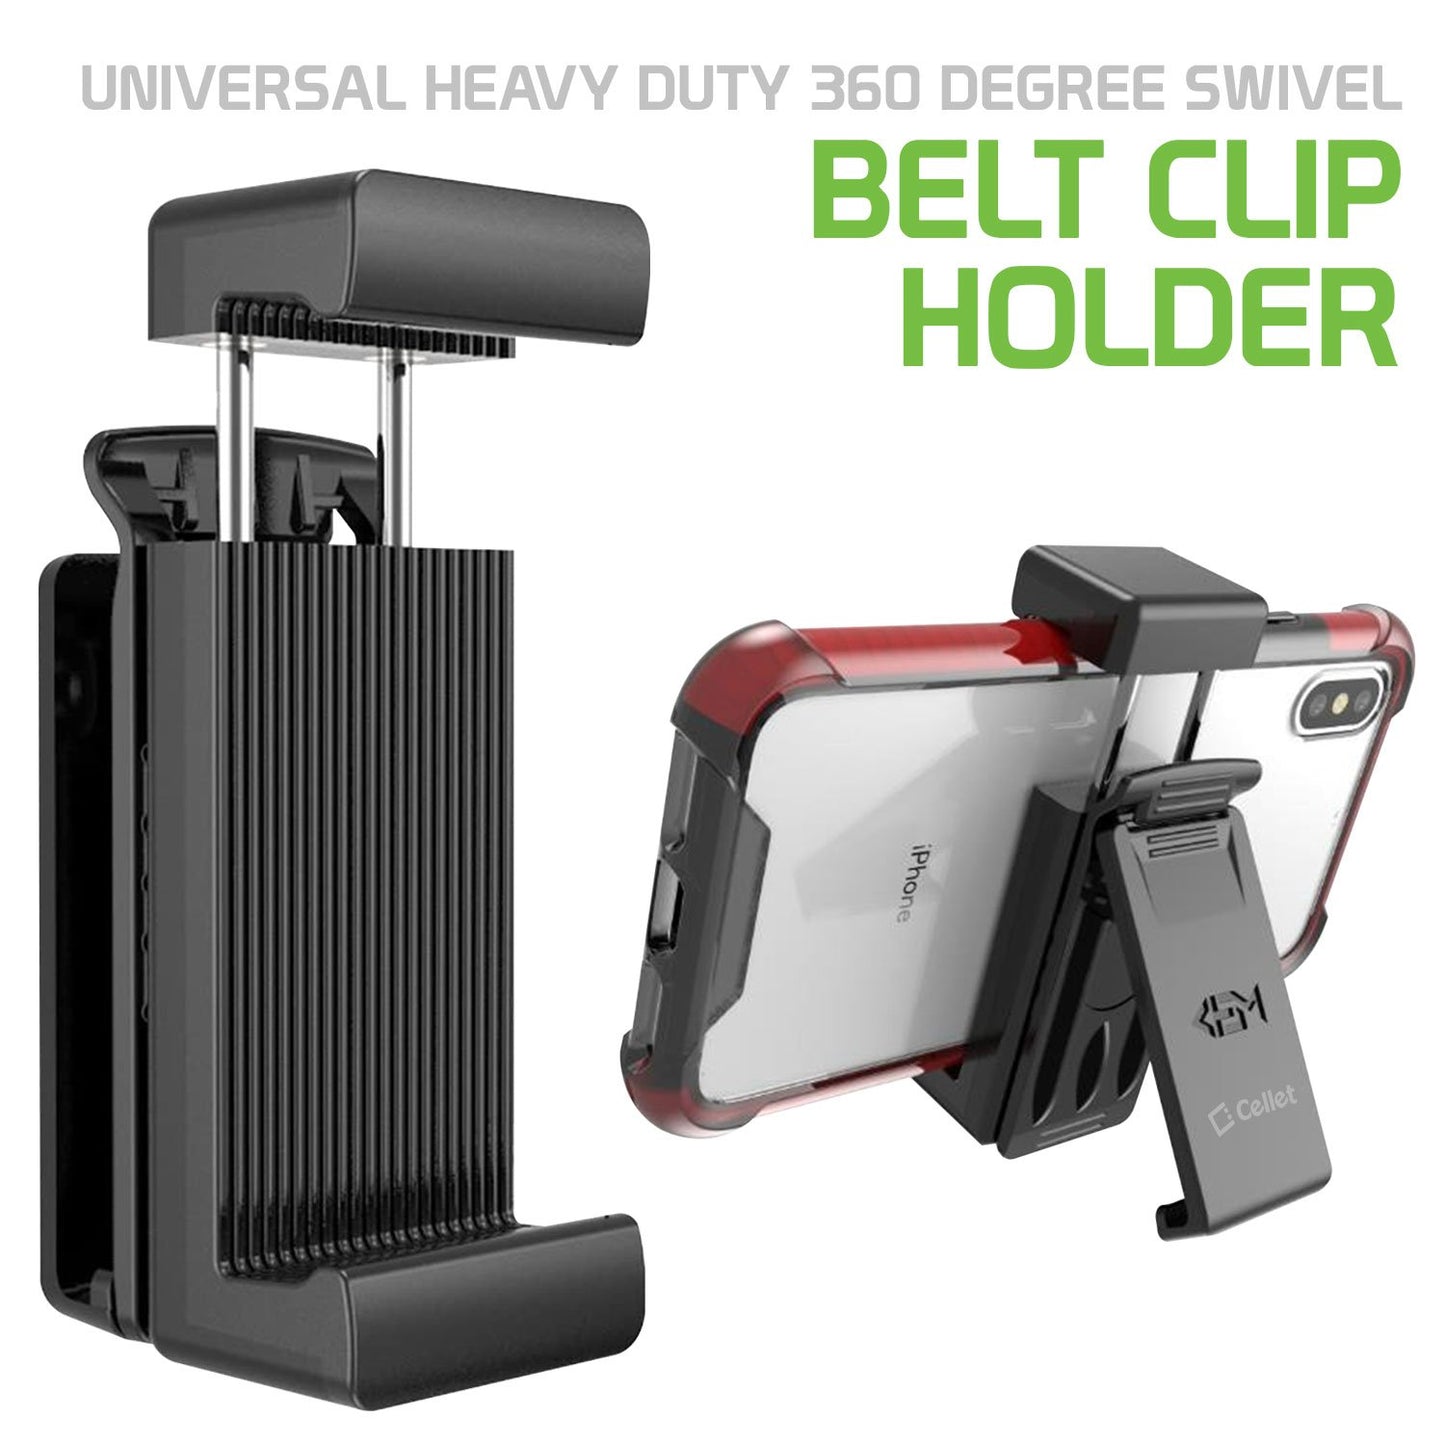 Cellet Universal Heavy Duty 360 degree Swivel Belt Clip Holder Compatible to iPhone 13 Pro Max, Samsung Galaxy S22 and more